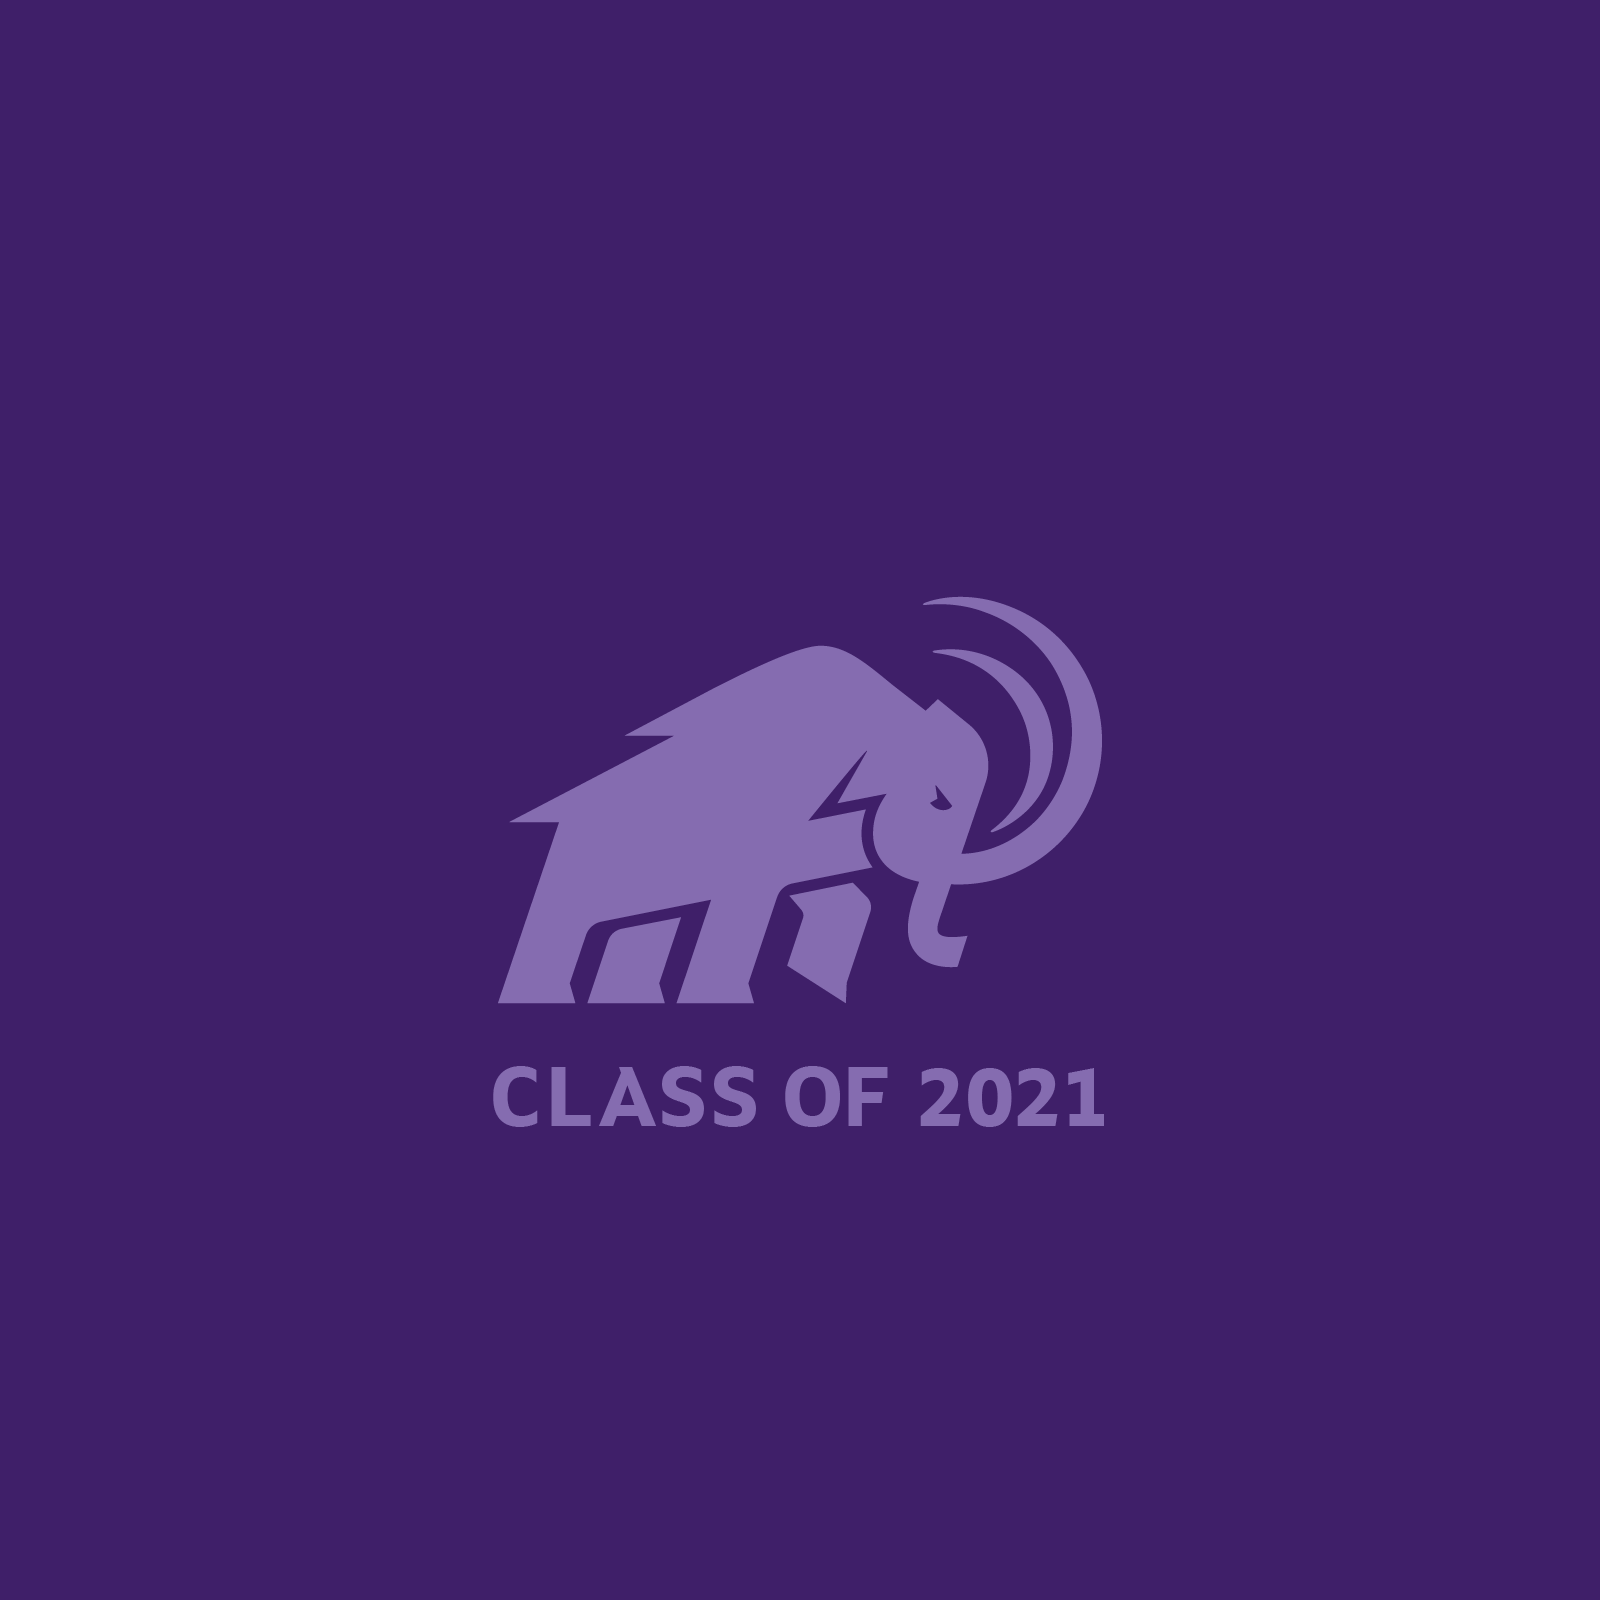 Class Of 2021 Wallpapers